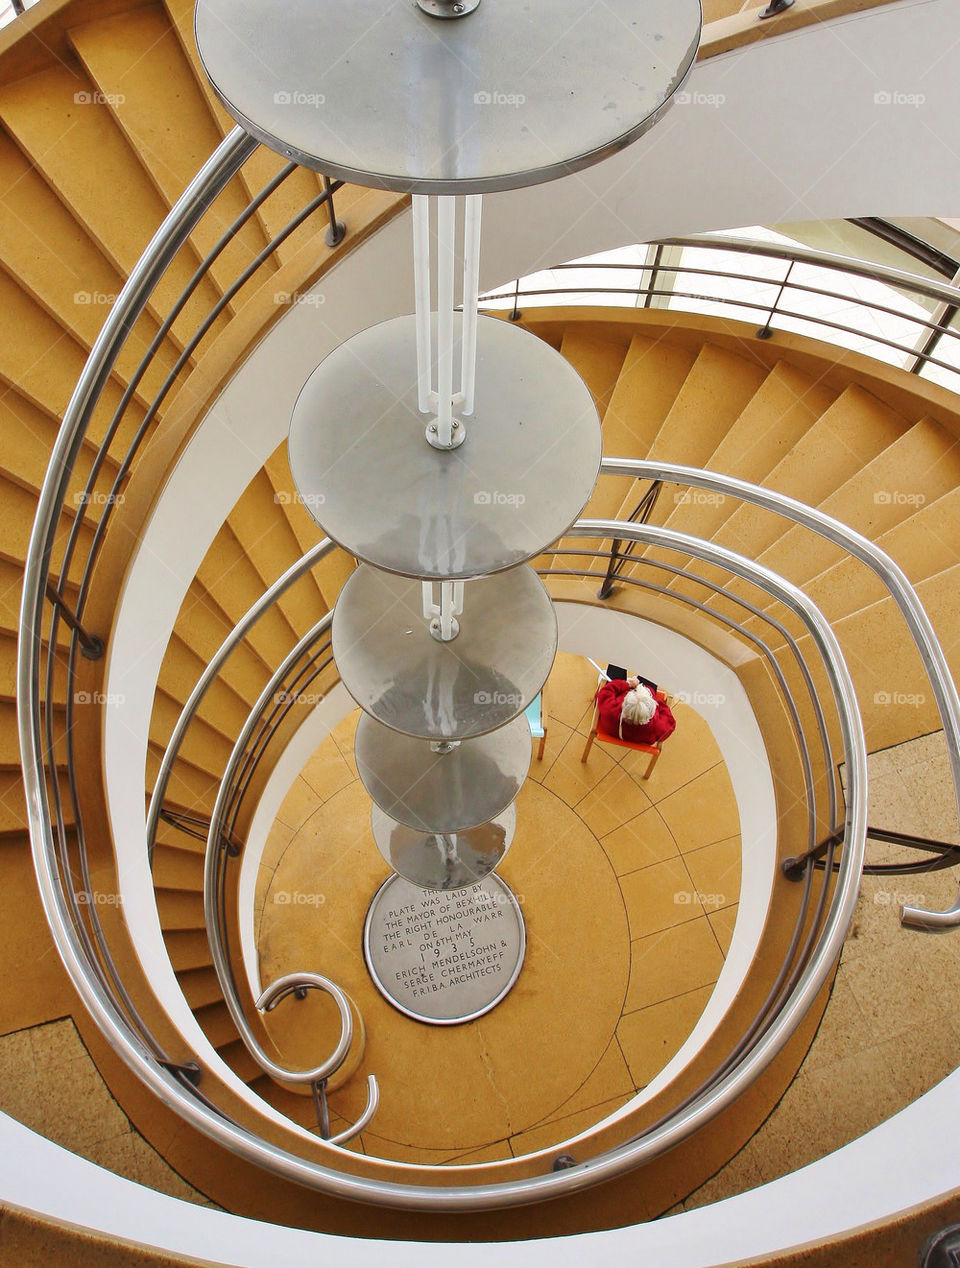 On the spiral stair